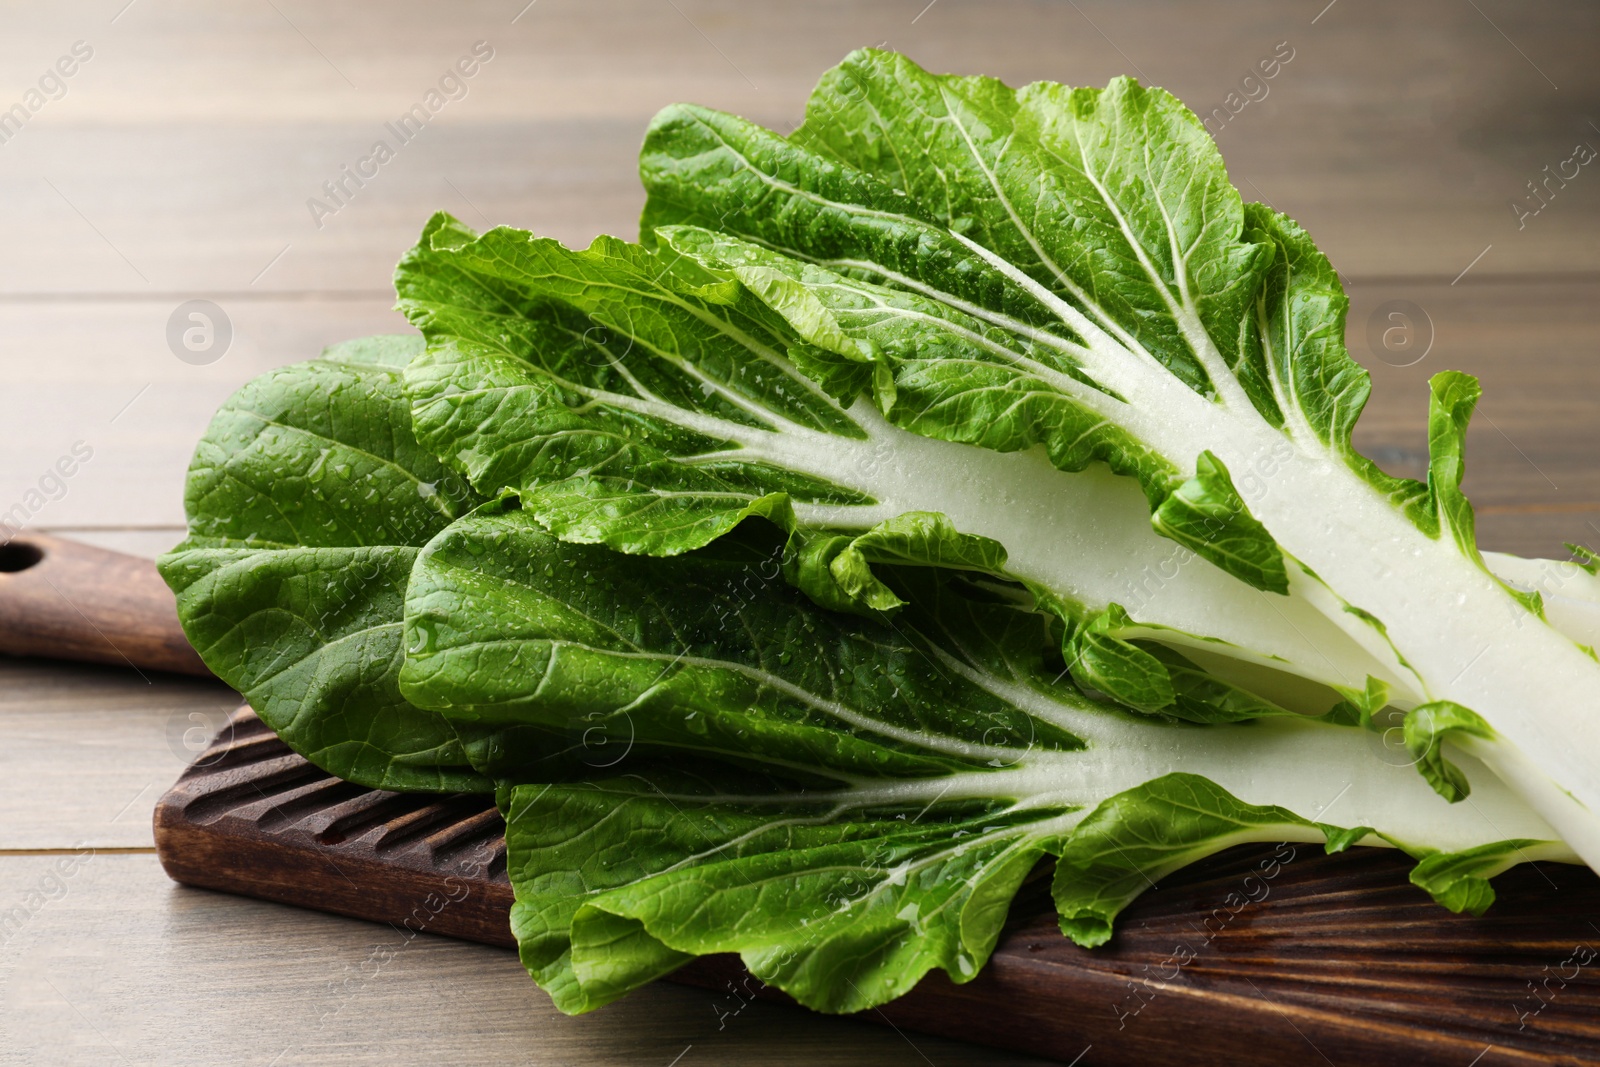 Photo of Leaves of fresh green pak choy cabbage with water drops on wooden table, closeup